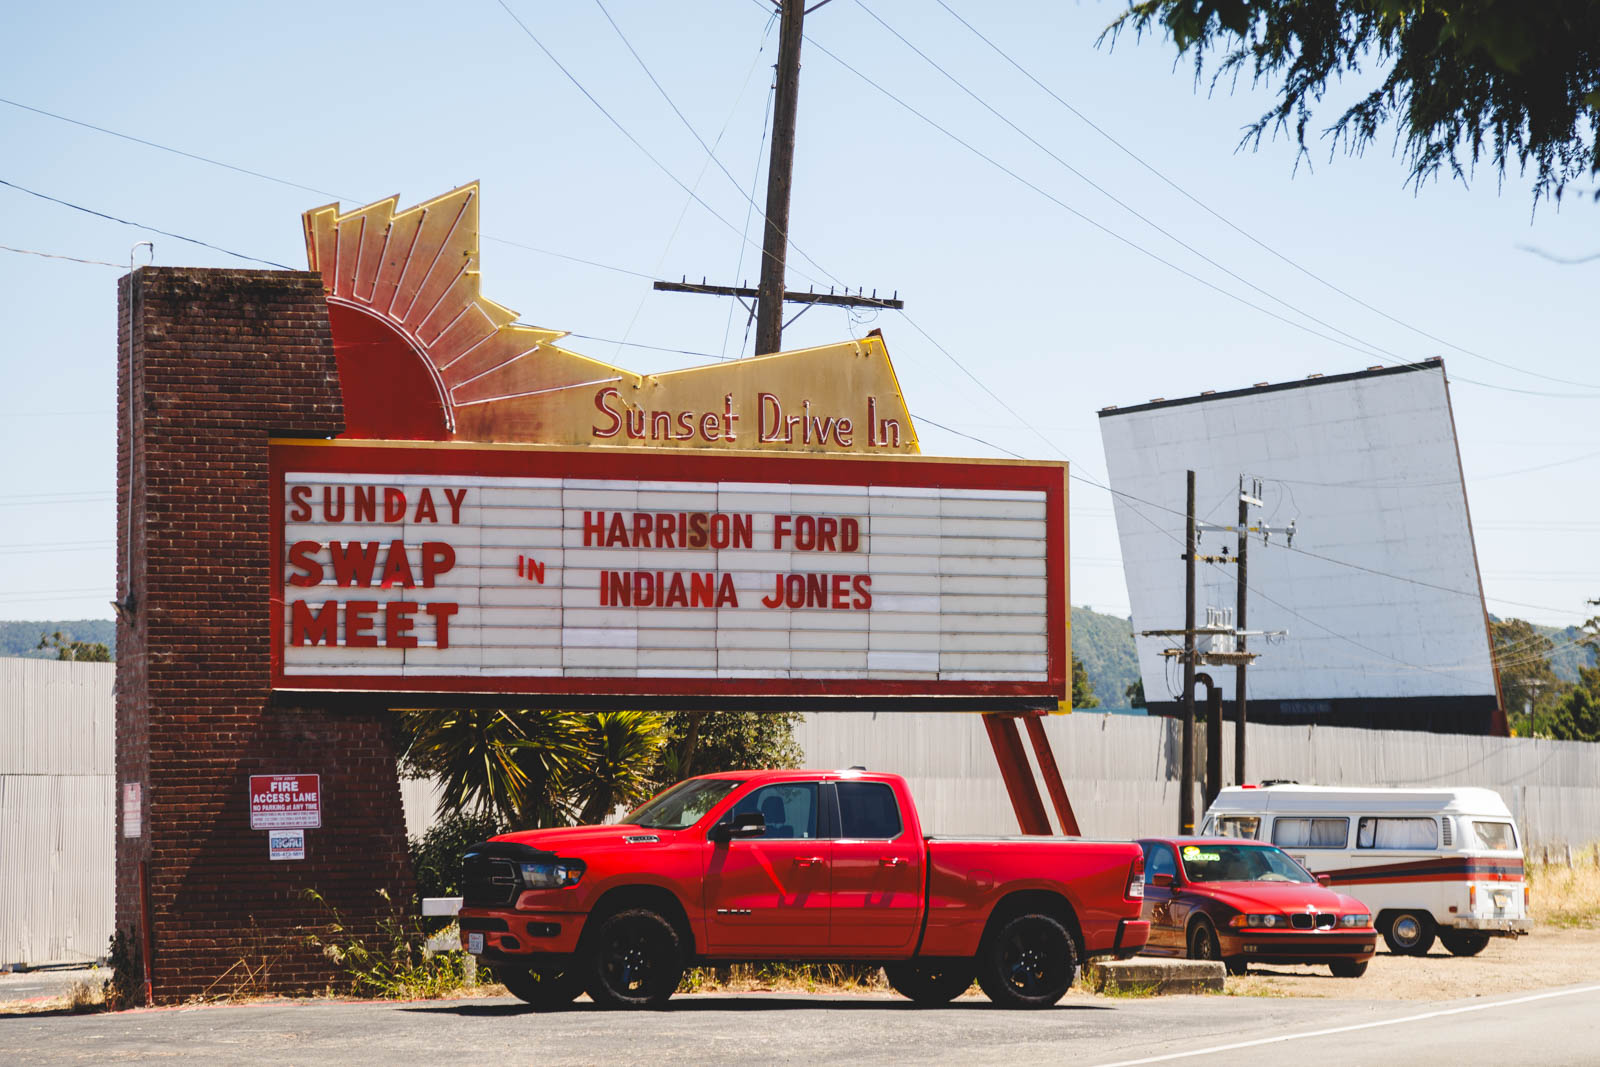 Red truck parked in front of the Sunset Drive-In sign which shows Indiana Jones playing in San Luis Obispo.